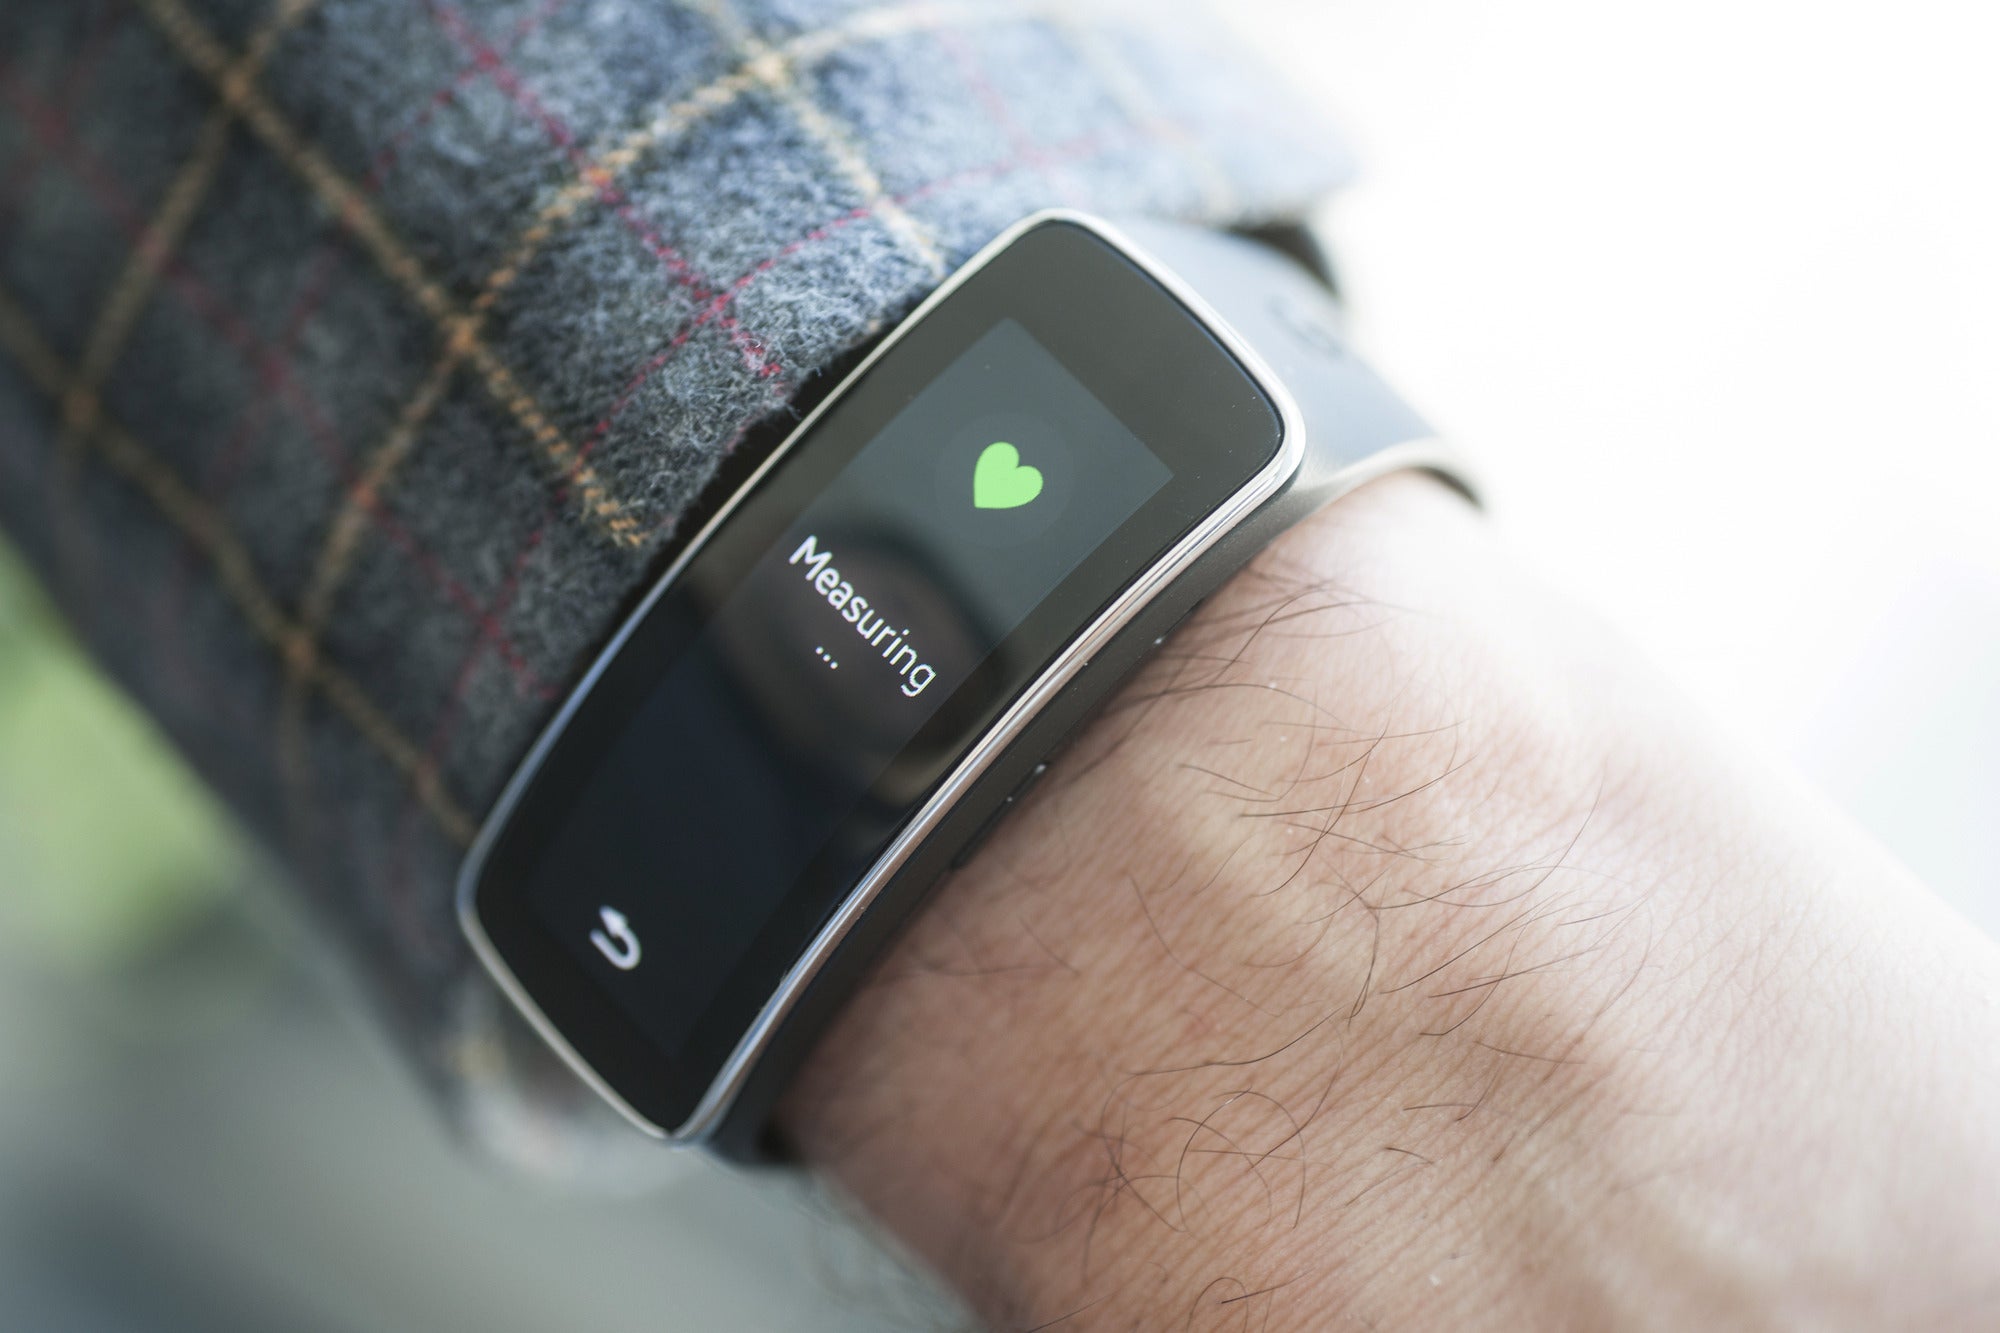 samsung-gear-fit-review-a-dazzling-wrist-wearable-with-serious